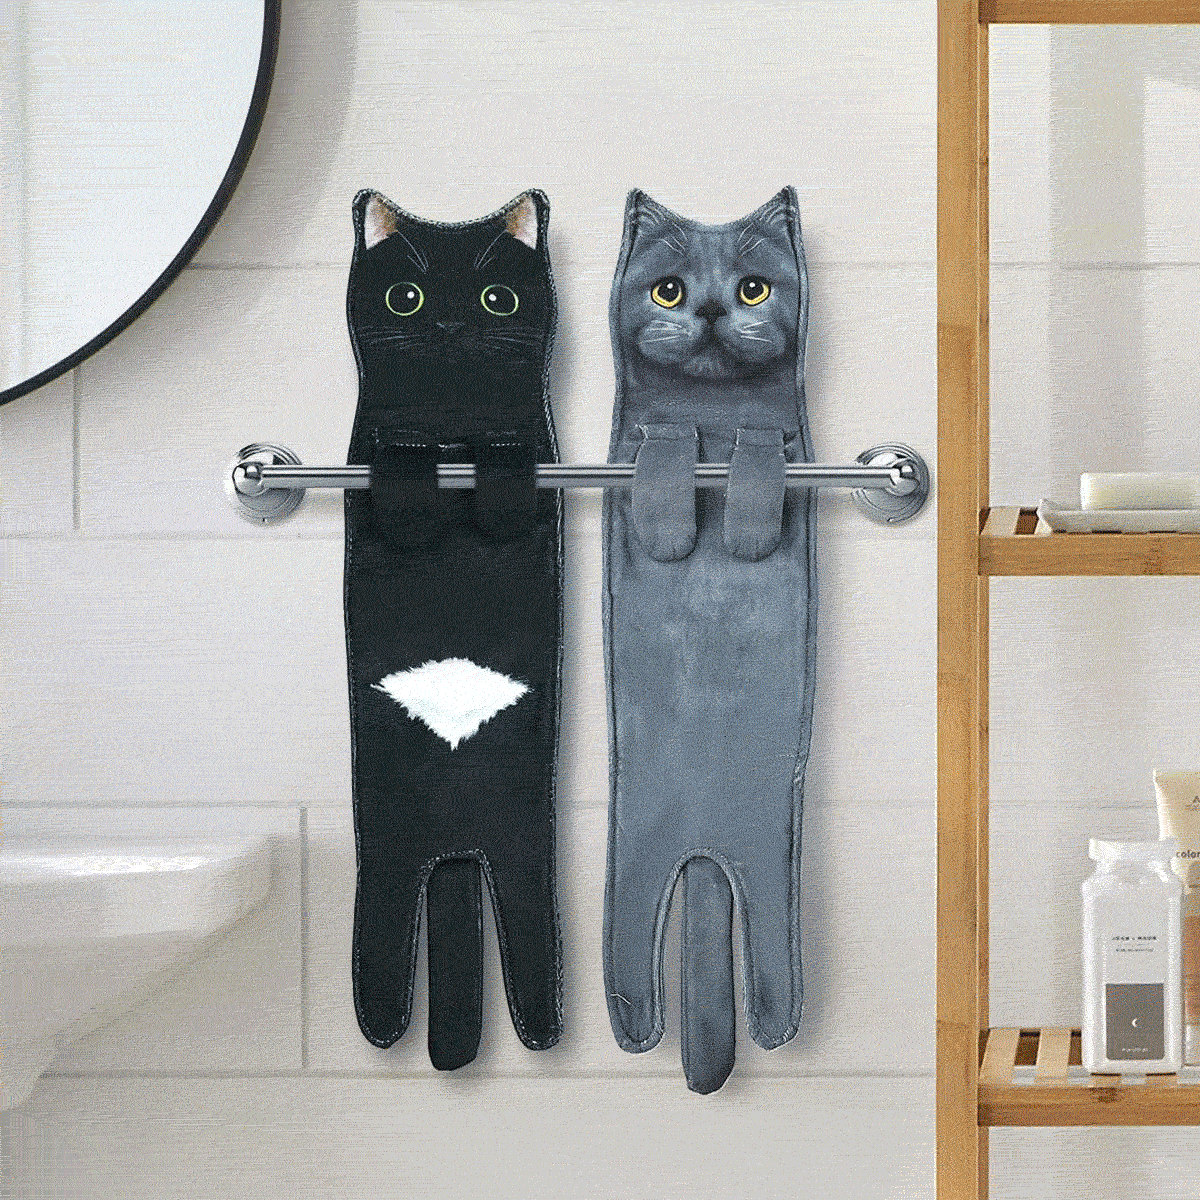 51 Gifts For Cat Lovers And Their Pets According To A Cat Lady